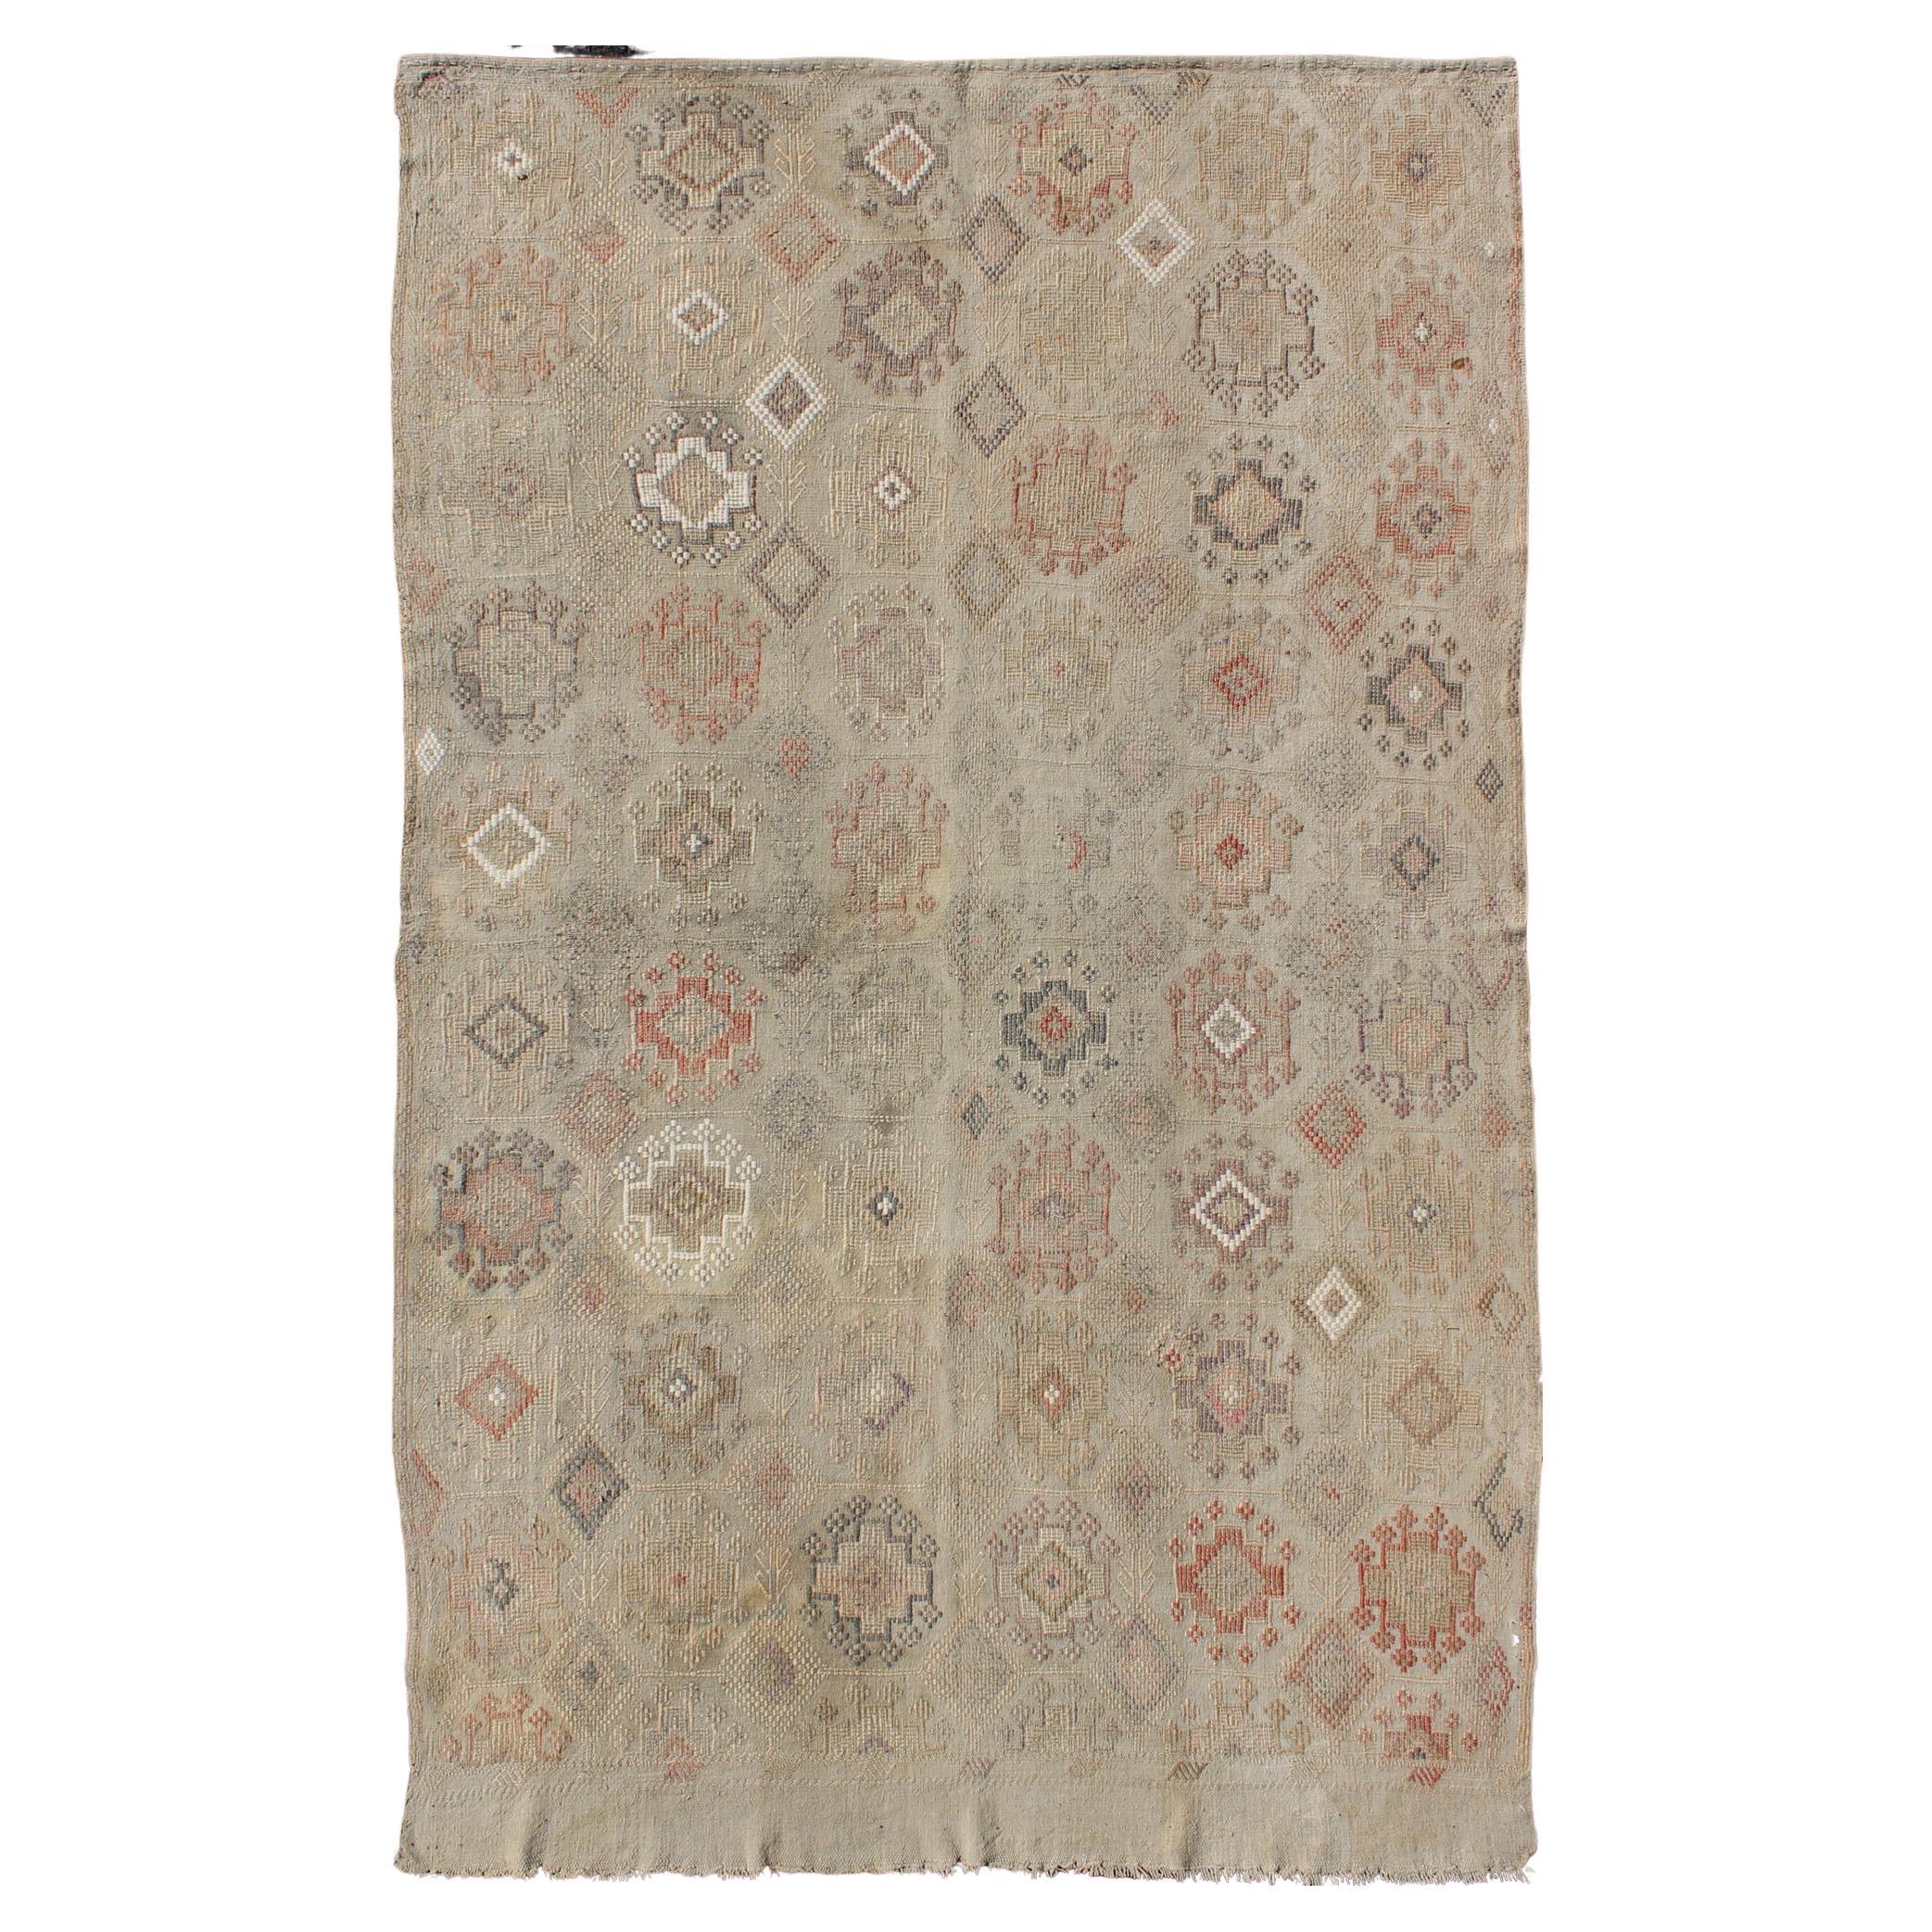 Vintage Turkish Kilim Featuring Muted Colors and All-Over Tribal Motif Design